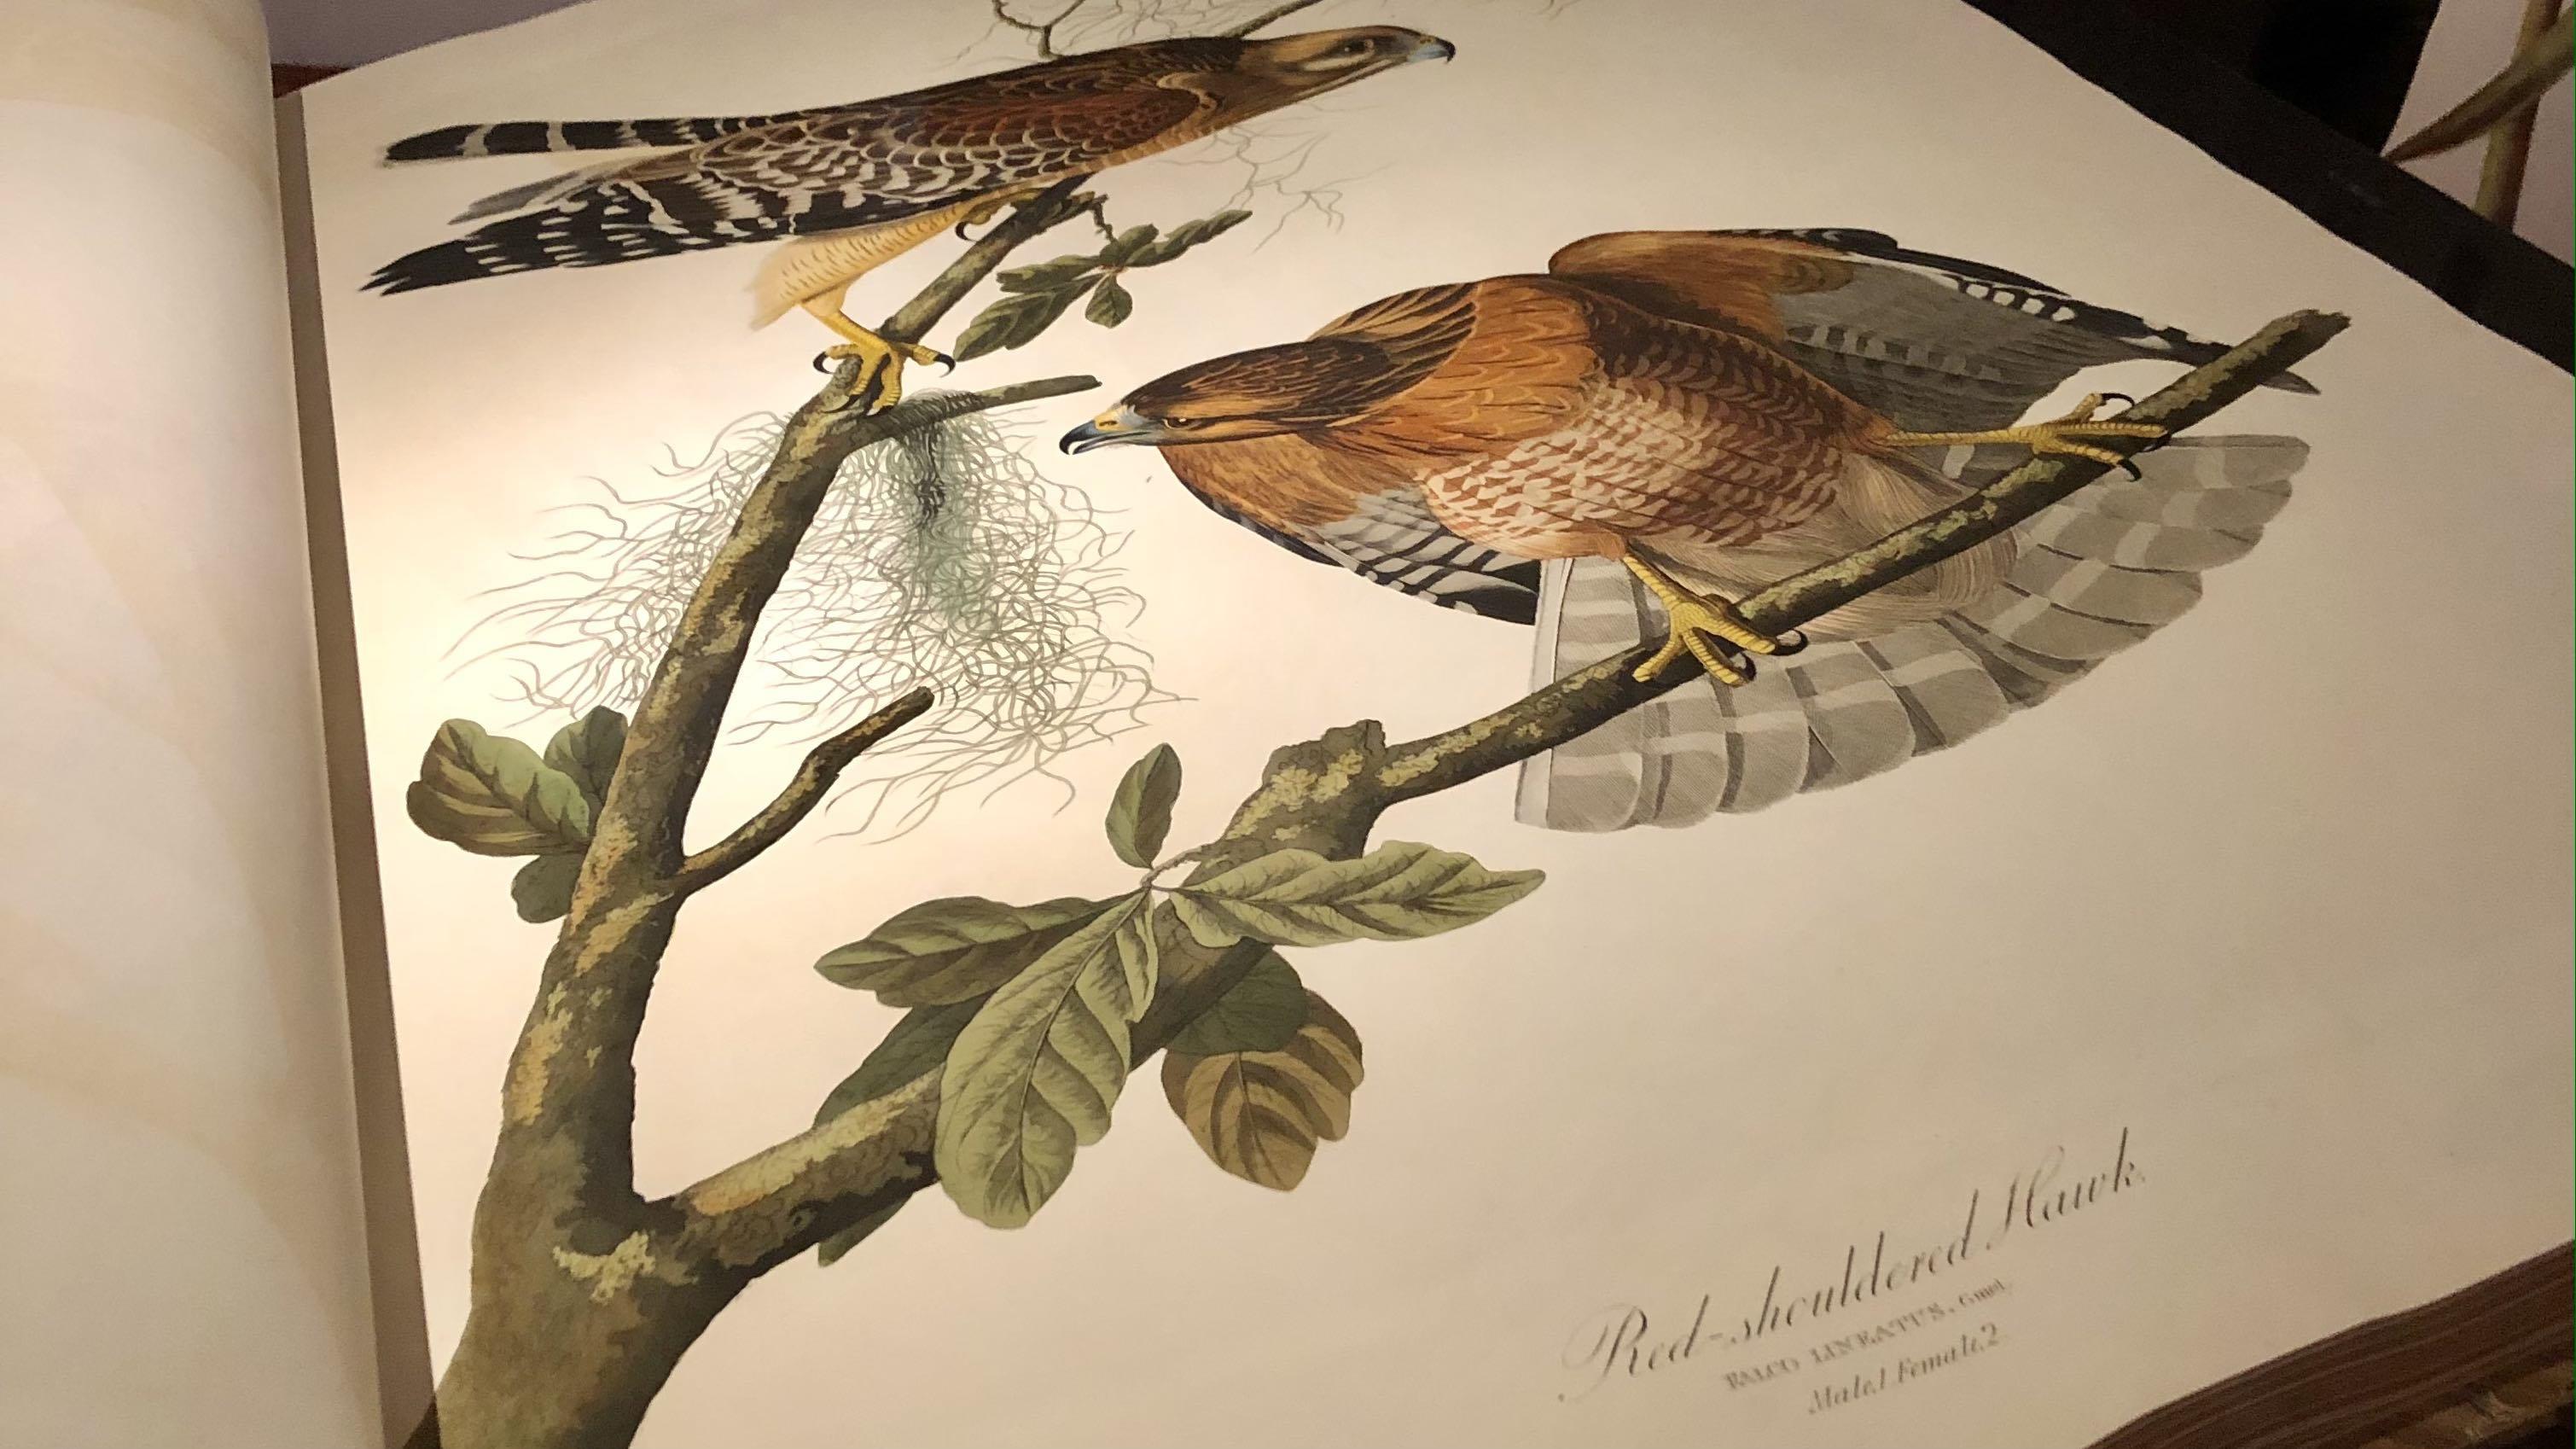 The hand-painted engravings in “Birds of America” were a leap forward in the science of ornithology. (Patty Wetli / WTTW News)